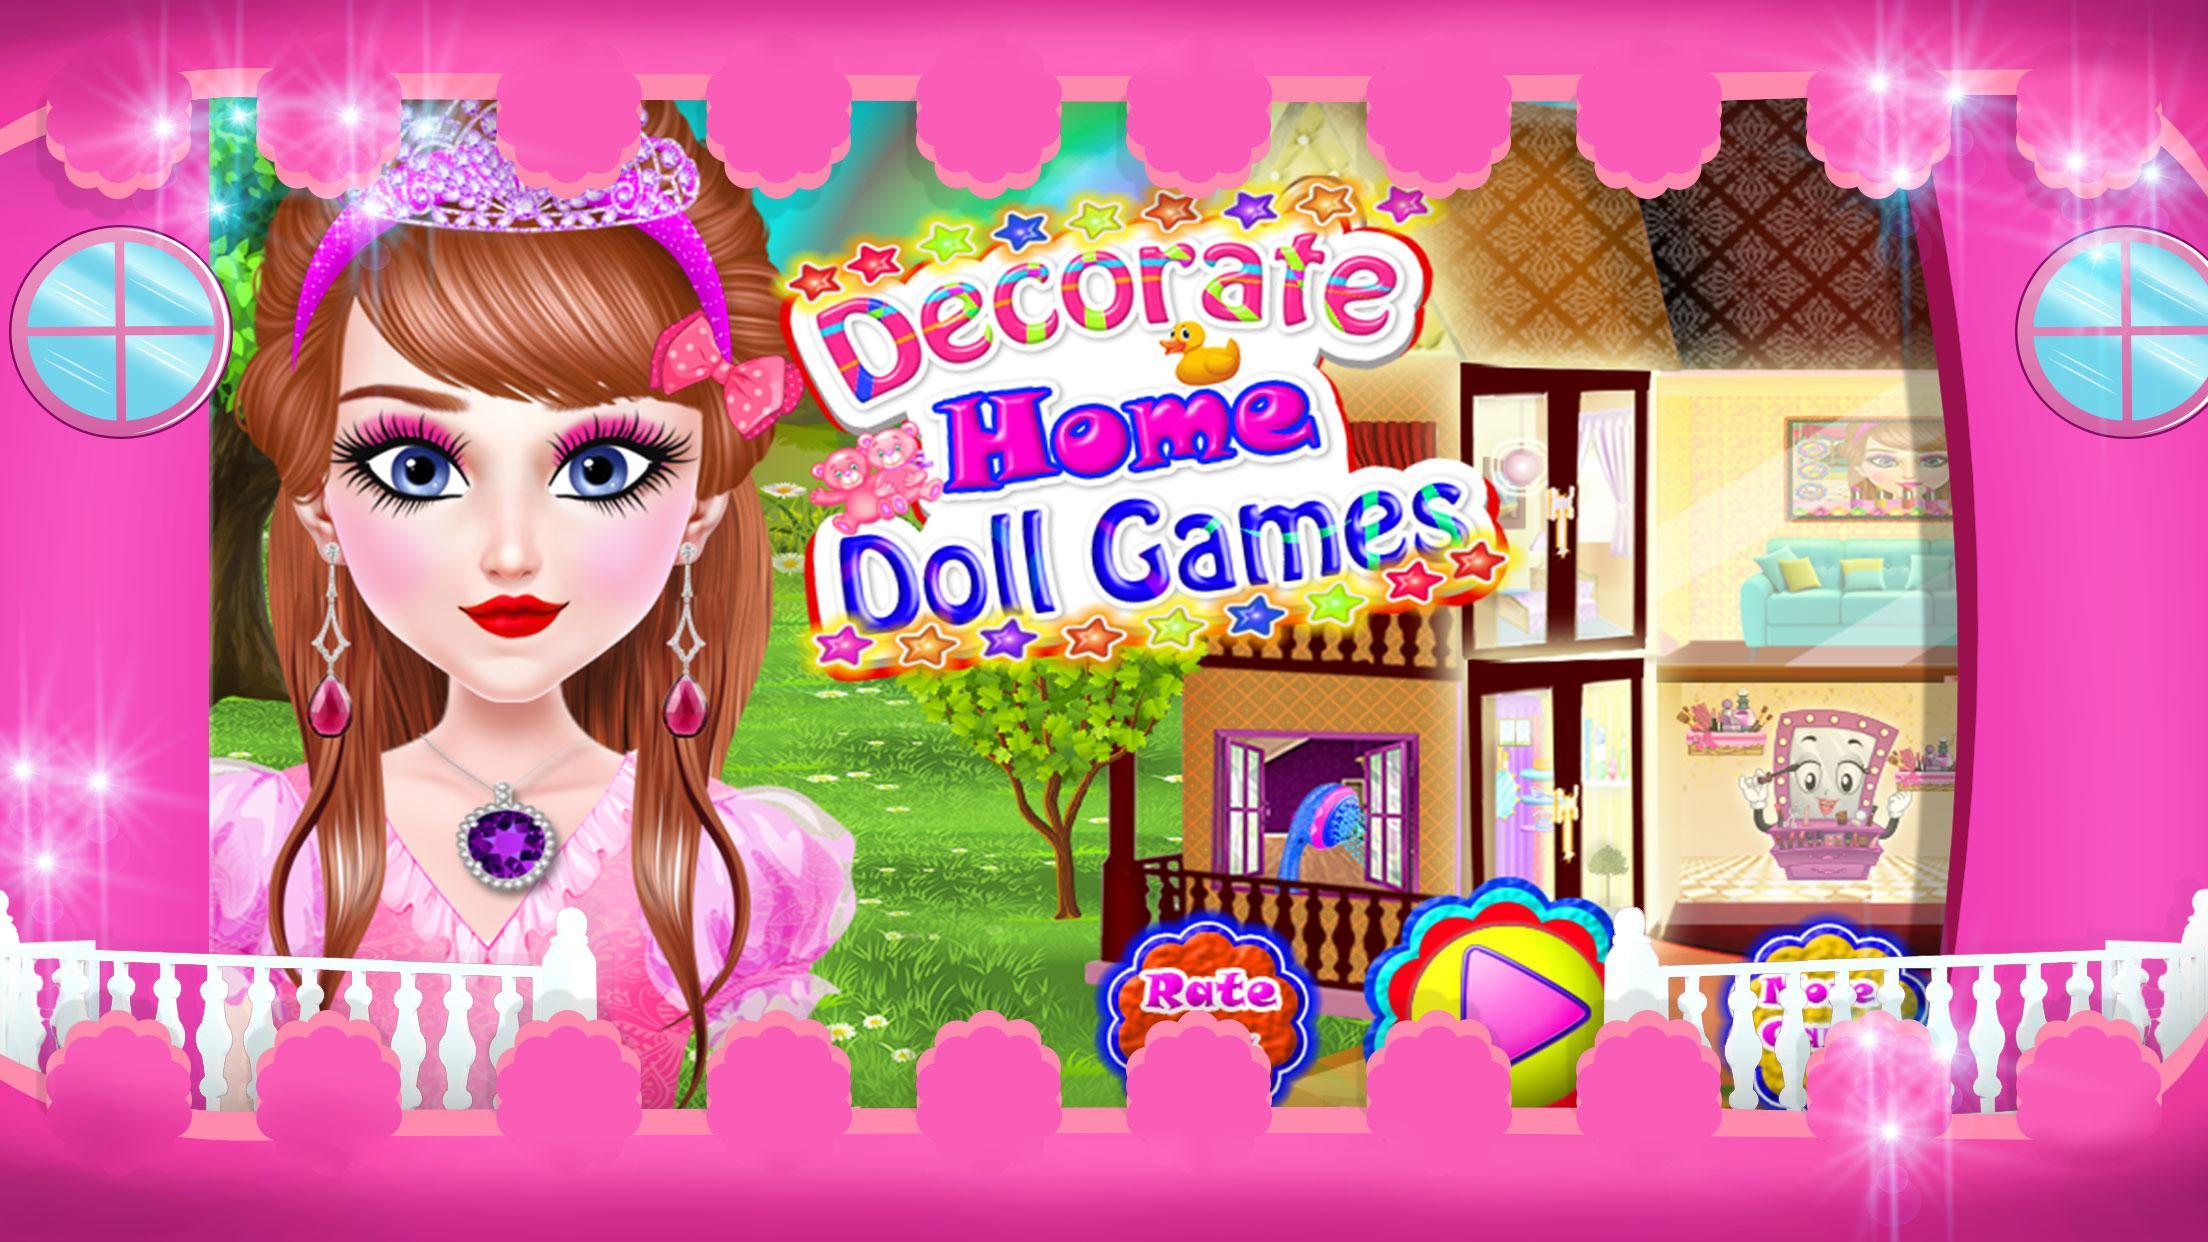 Decorate Home - Doll Games ภ า พ ห น า จ อ 10.